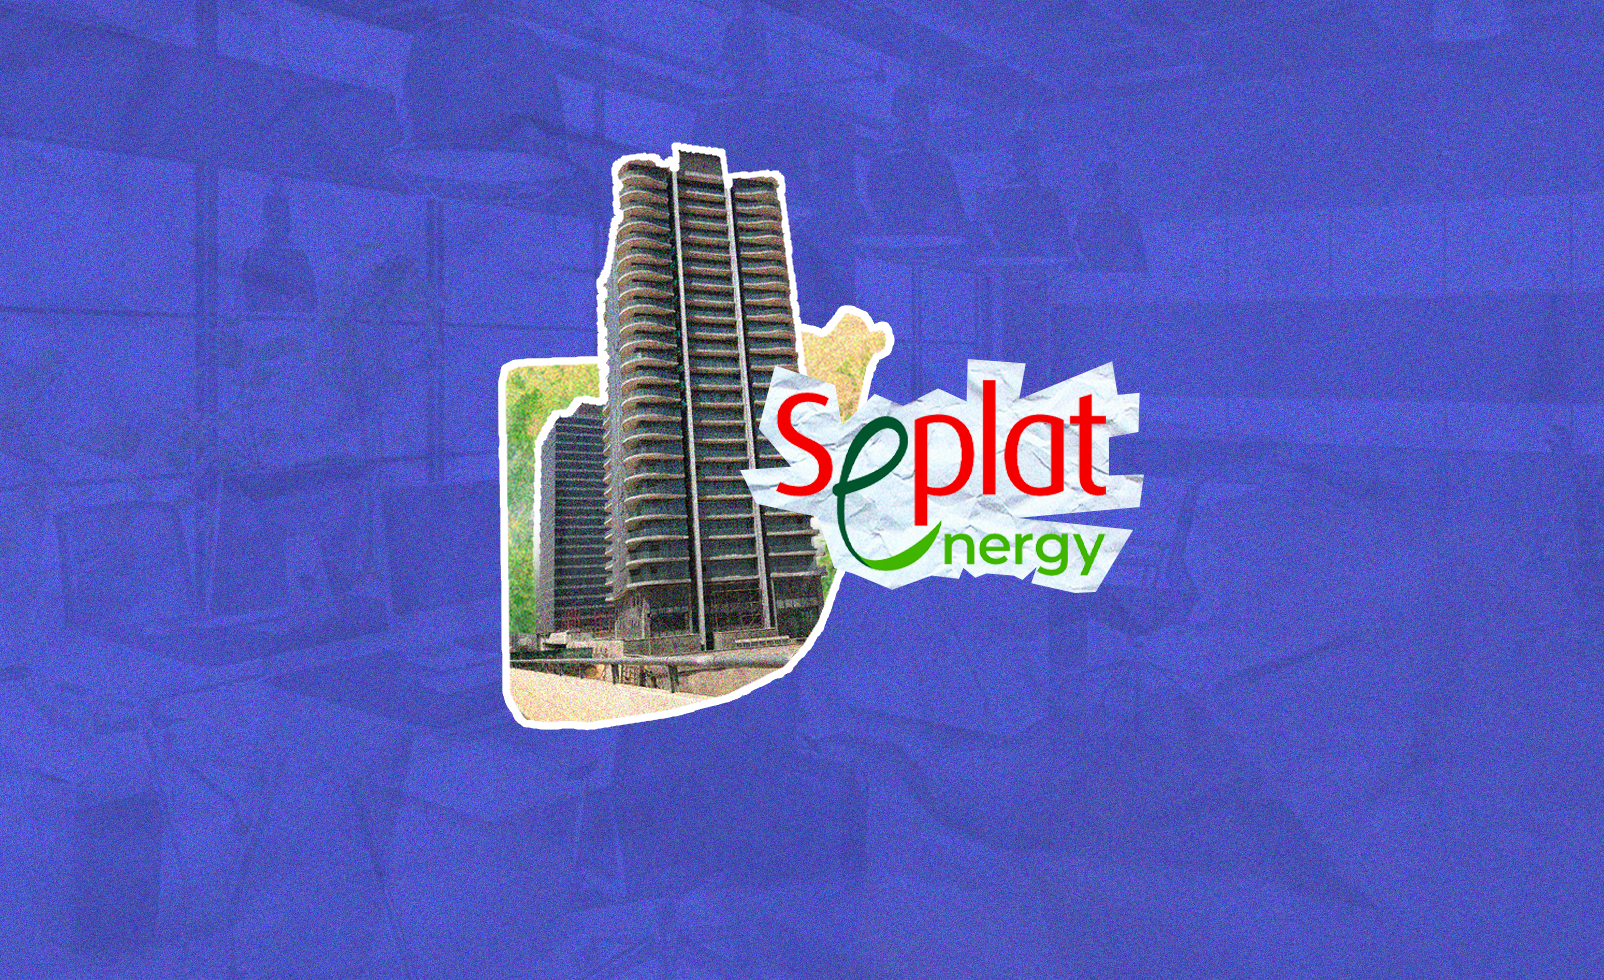 Seplat Opens its Corporate Office in Abuja! Here’s What You Need to Know About the Building.